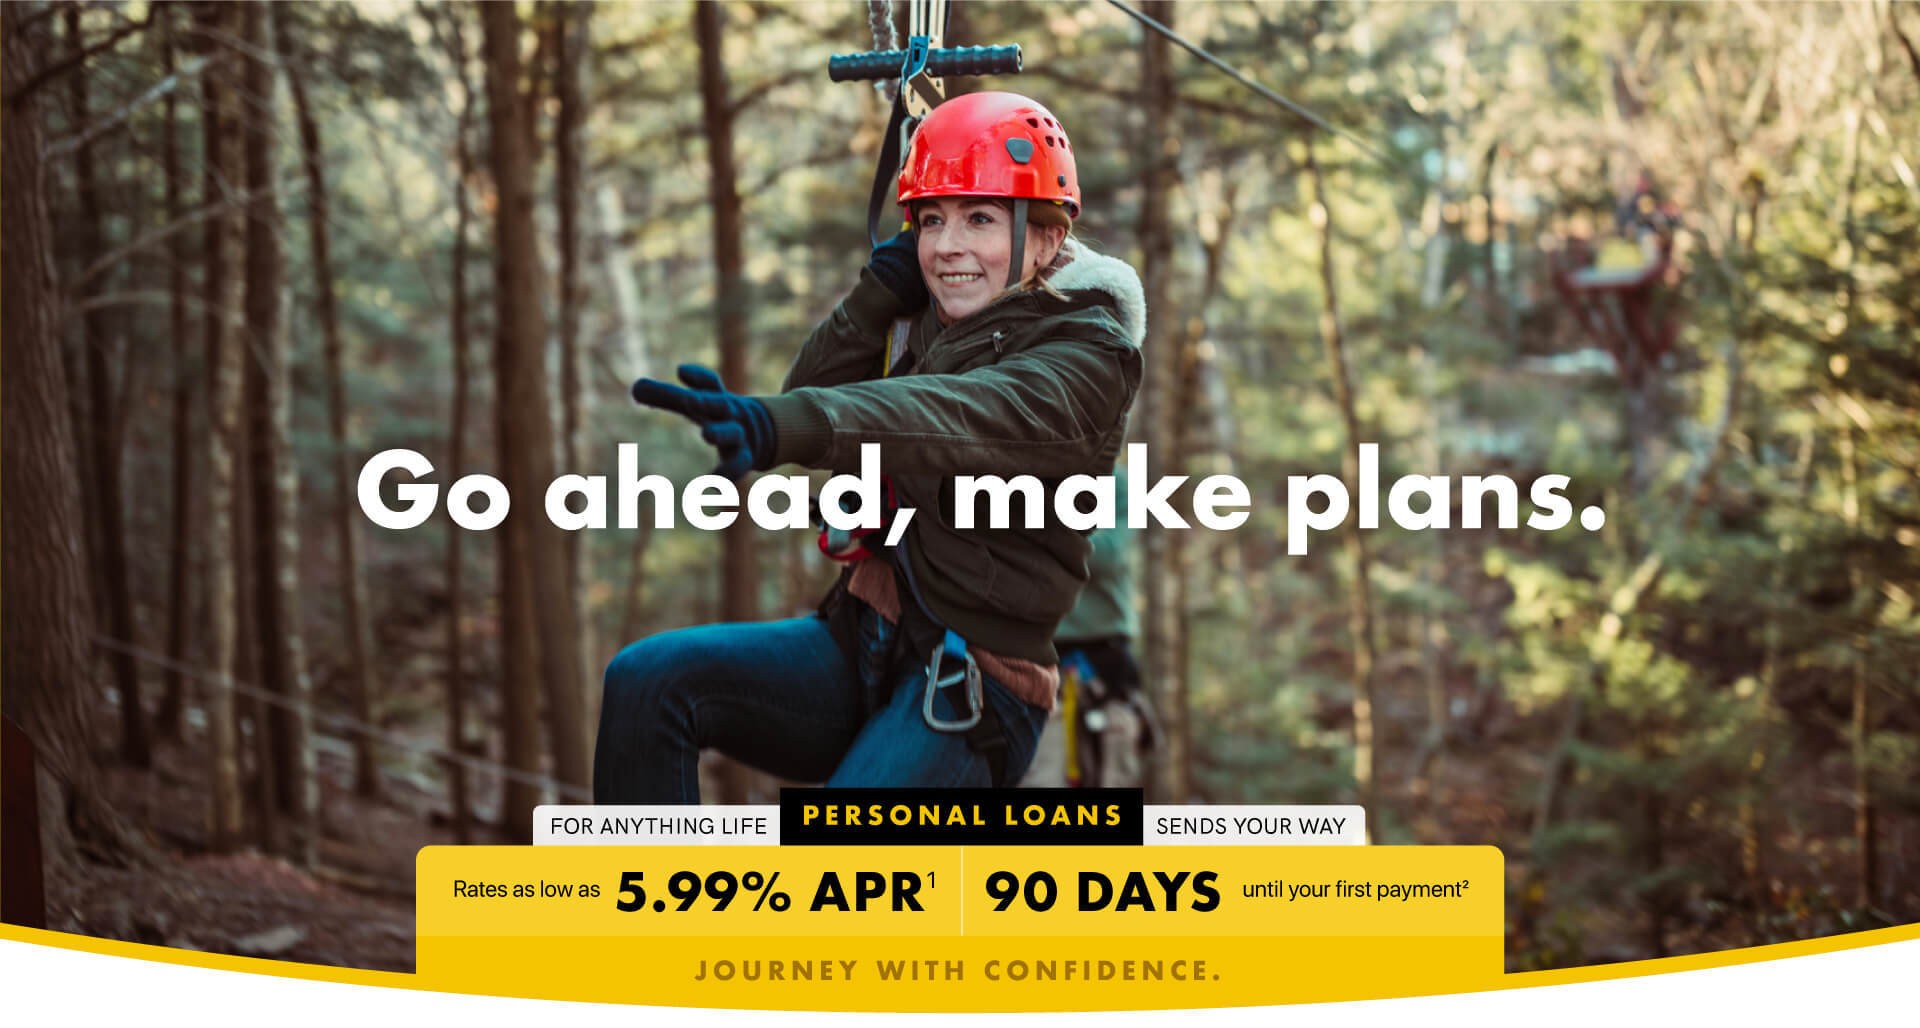 GO AHEAD. MAKE PLANS. For anything life sends your way: PERSONAL LOANS | Rates as low as 5.99% APR, 90 days until your first payment | Journey with confidence.